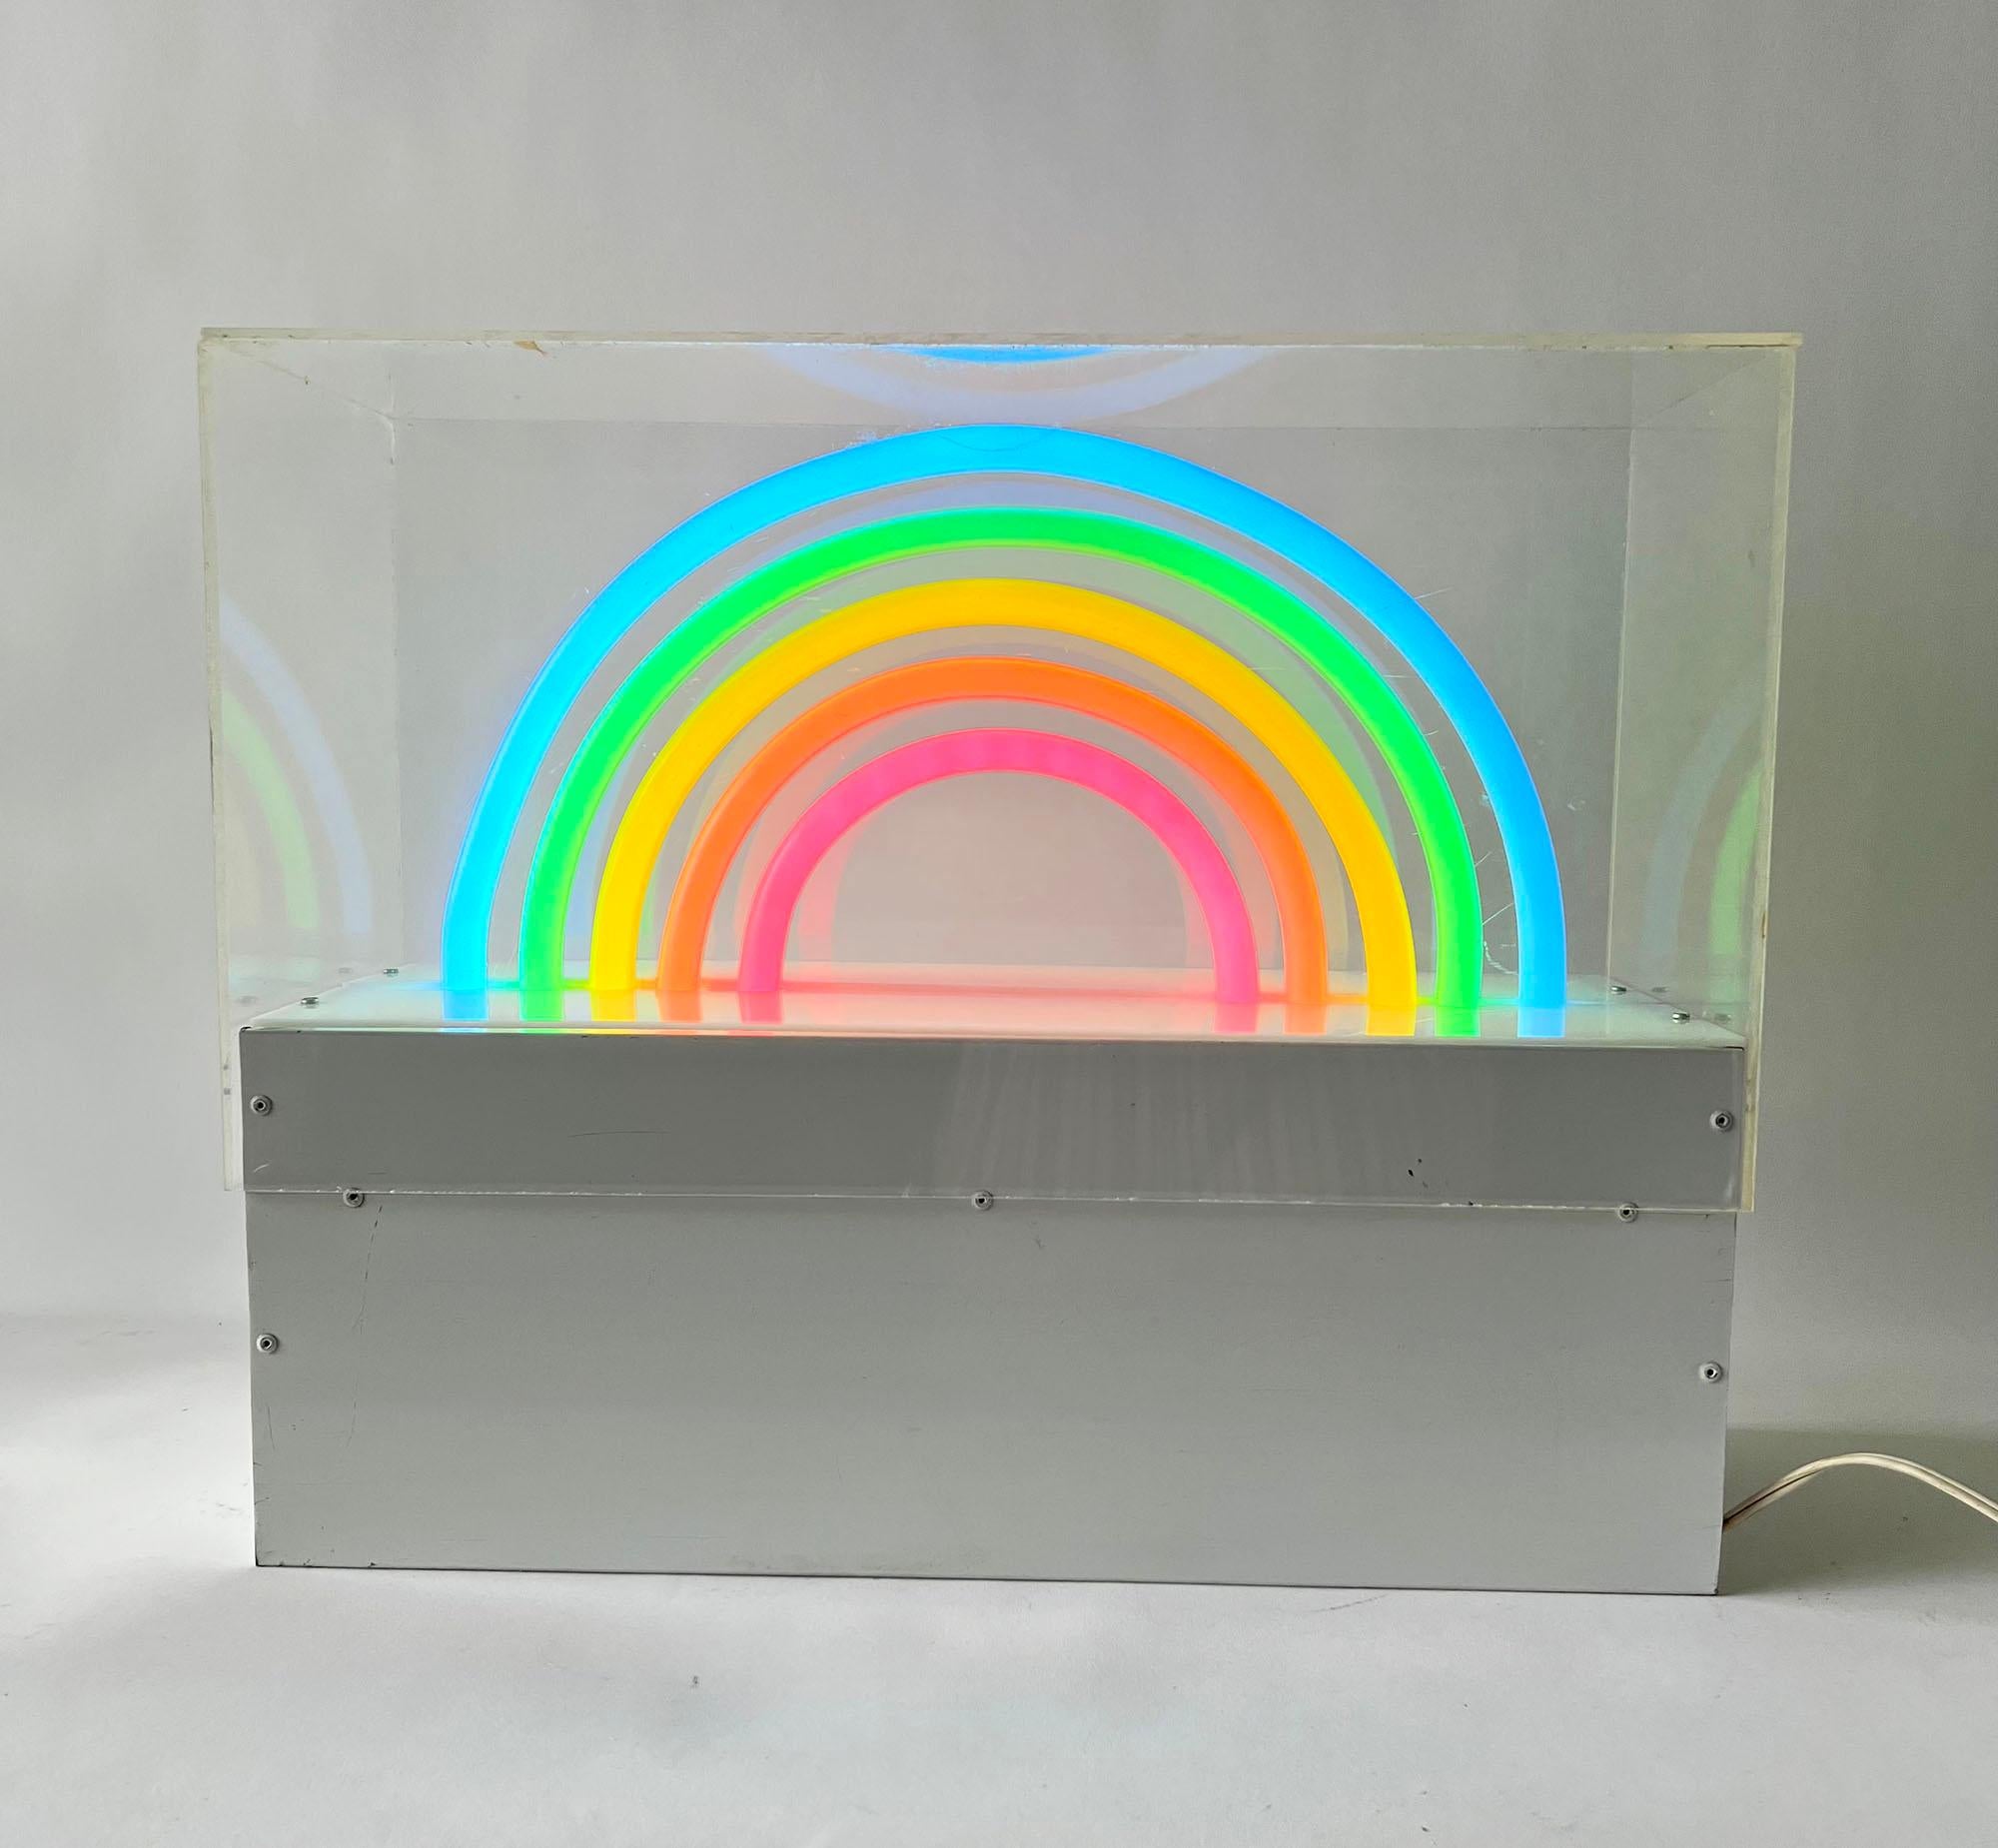 1970s or 1980s rainbow neon art plexiglass sculpture, maker unknown. First picture shows the sculpture in natural sunlight in the on position while the last picture shows it in the evening while on. The fourth thru seventh pictures give front and